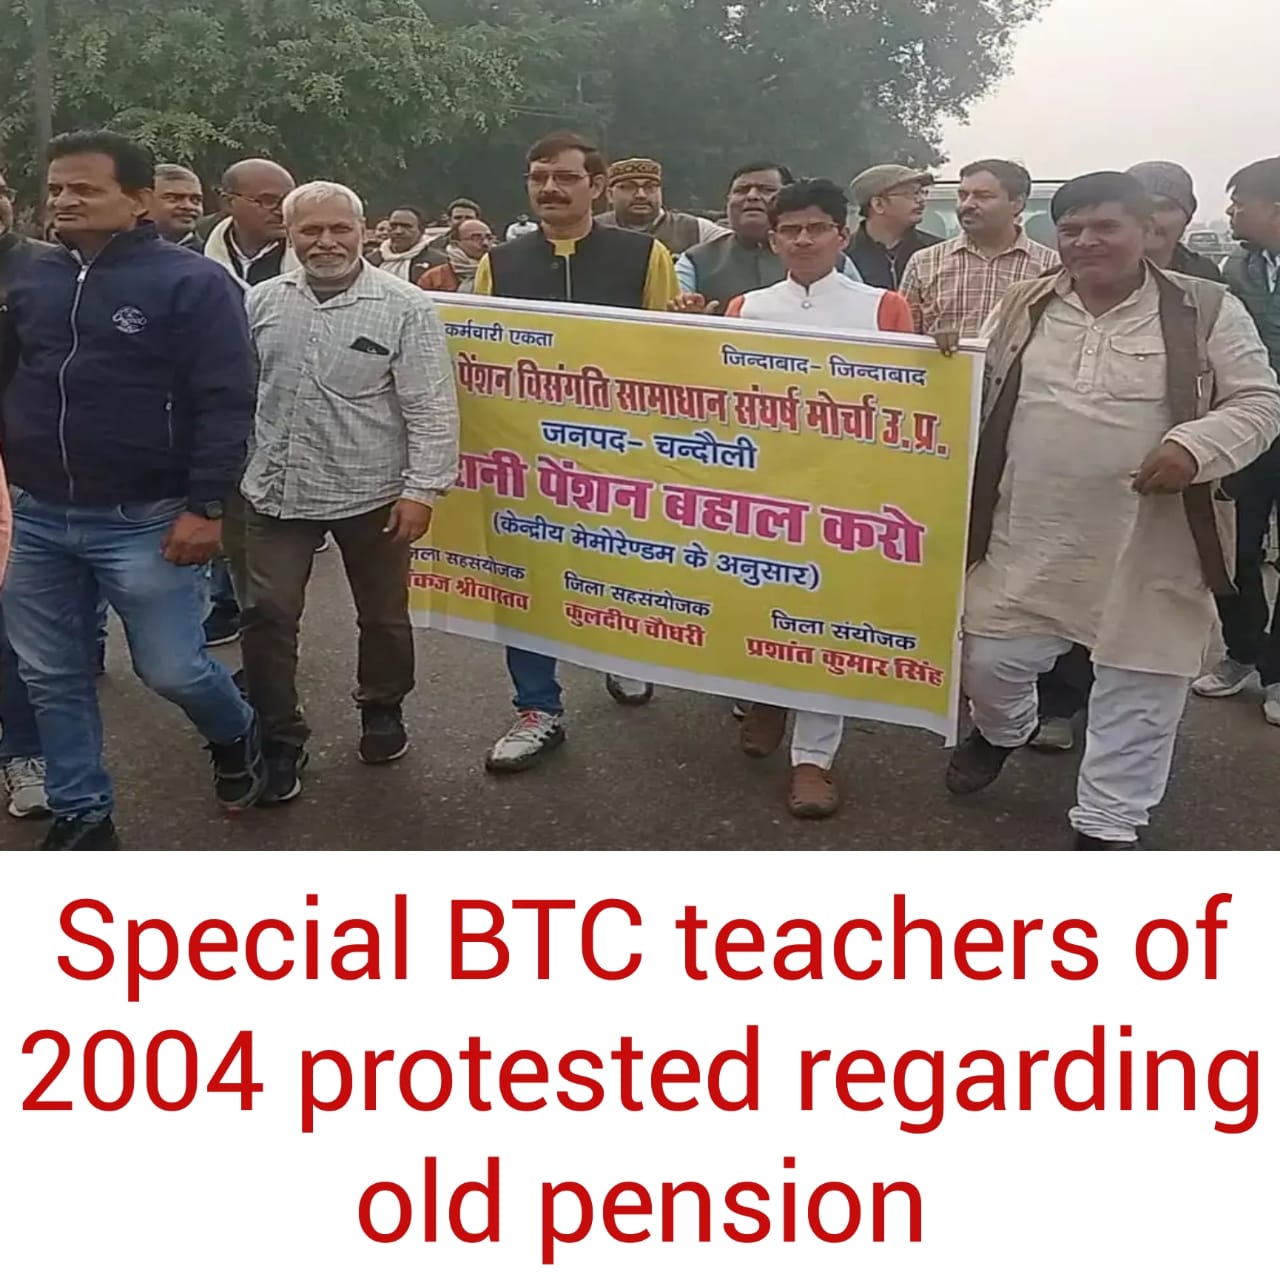 Special BTC teachers of 2004 protested regarding old pension